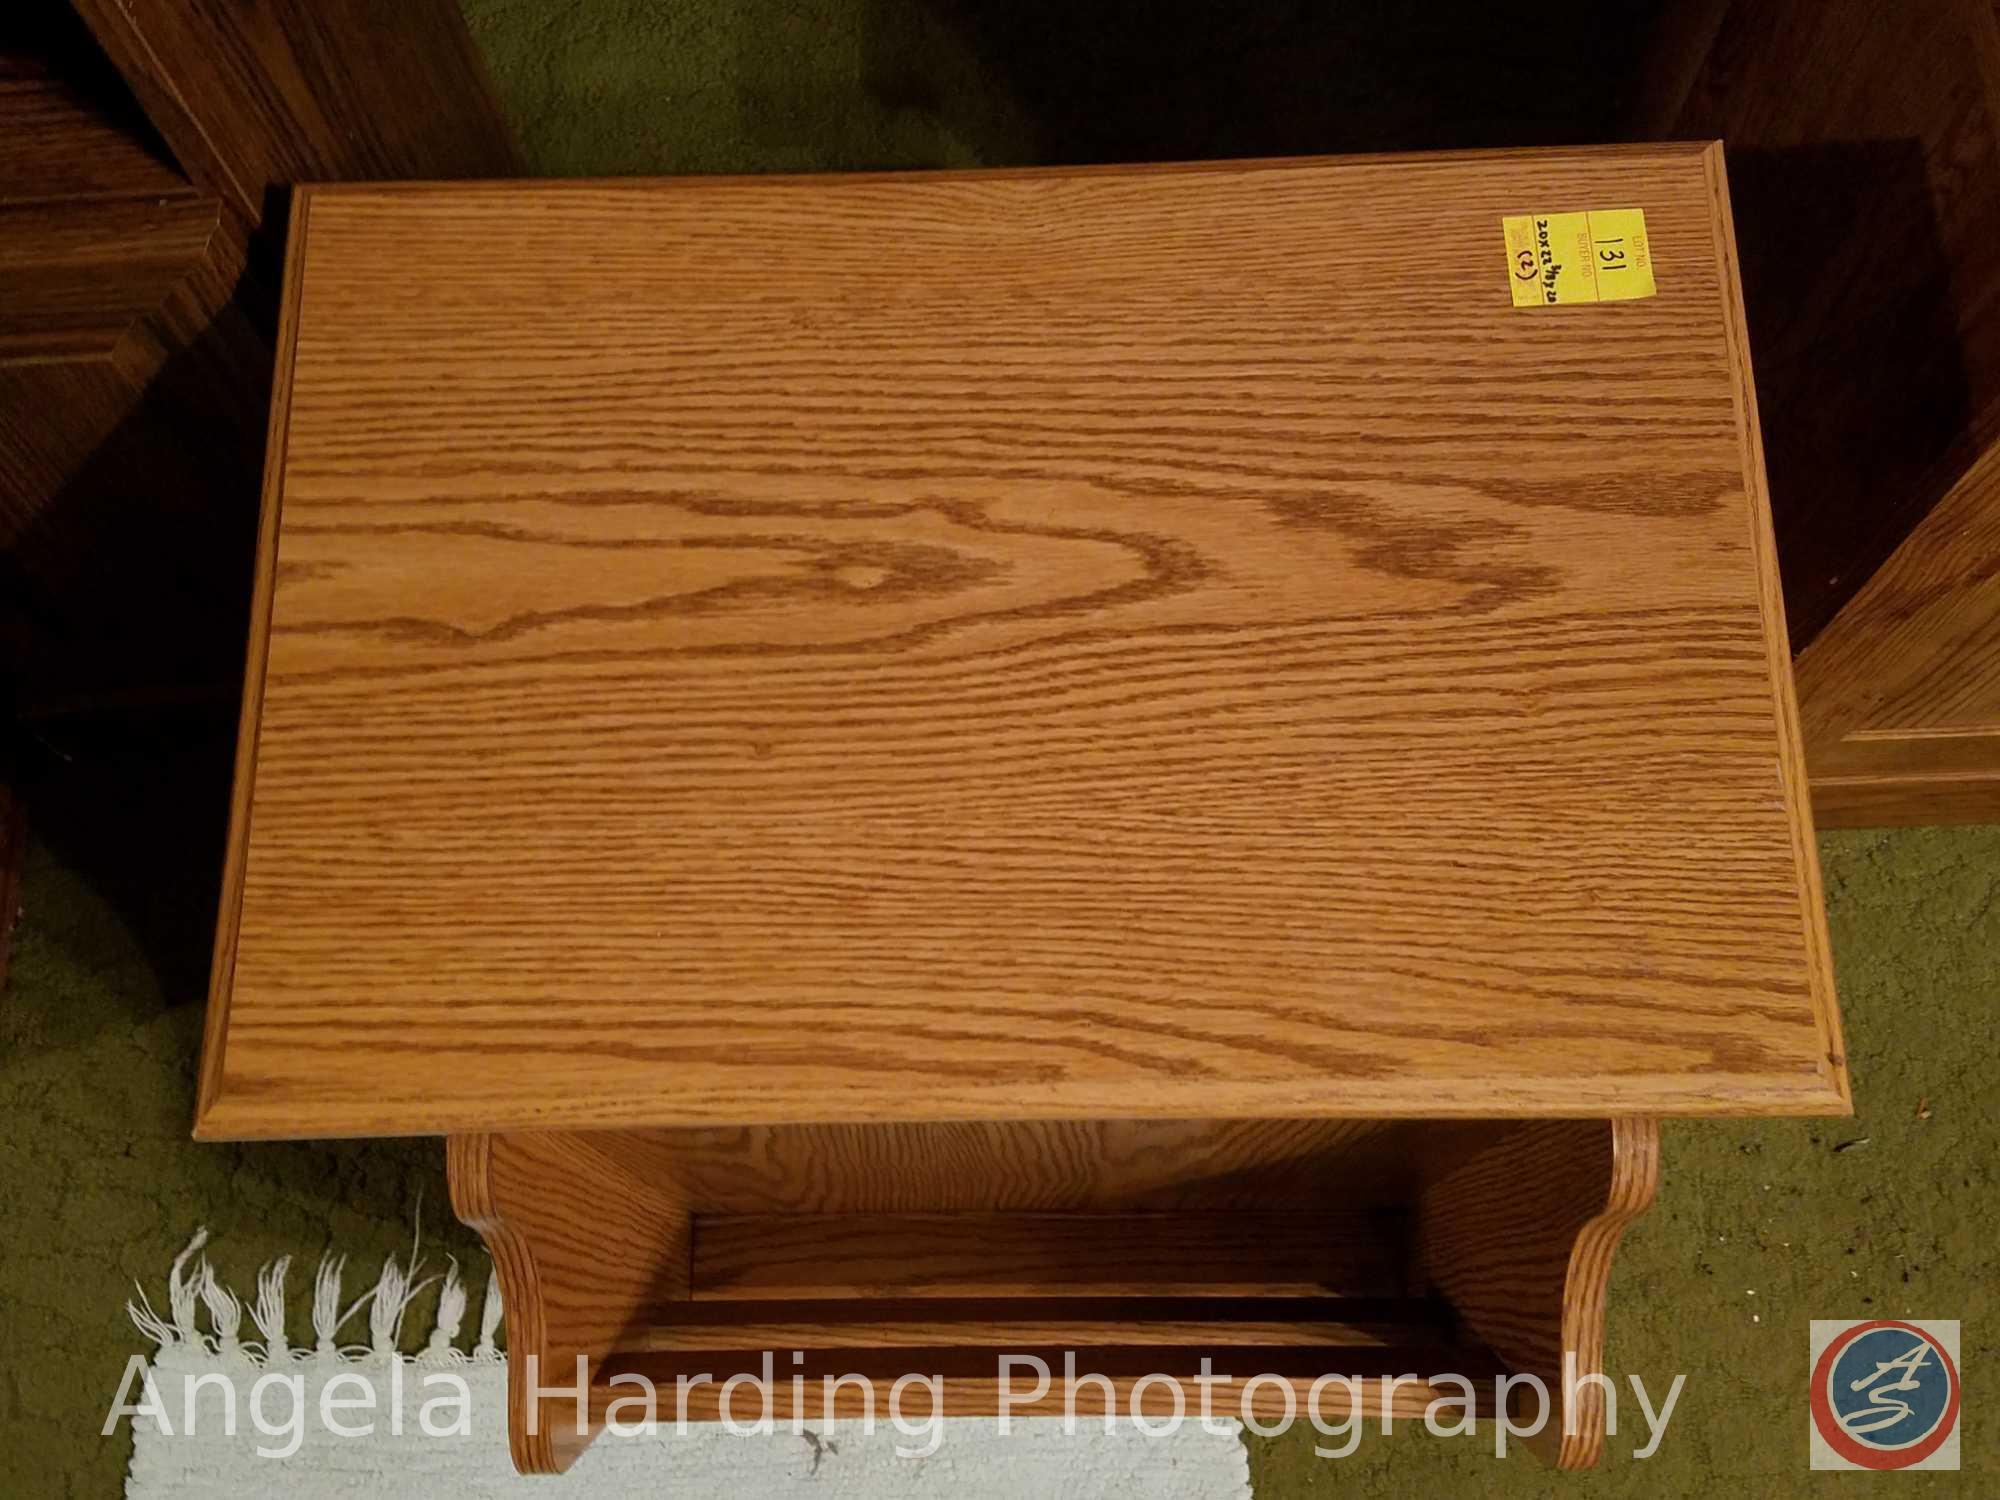 Wood Side Table with (1) Door/(1) Shelf and Magazine Rack 20"x22.5"x20" and Wood Side Table with (1)